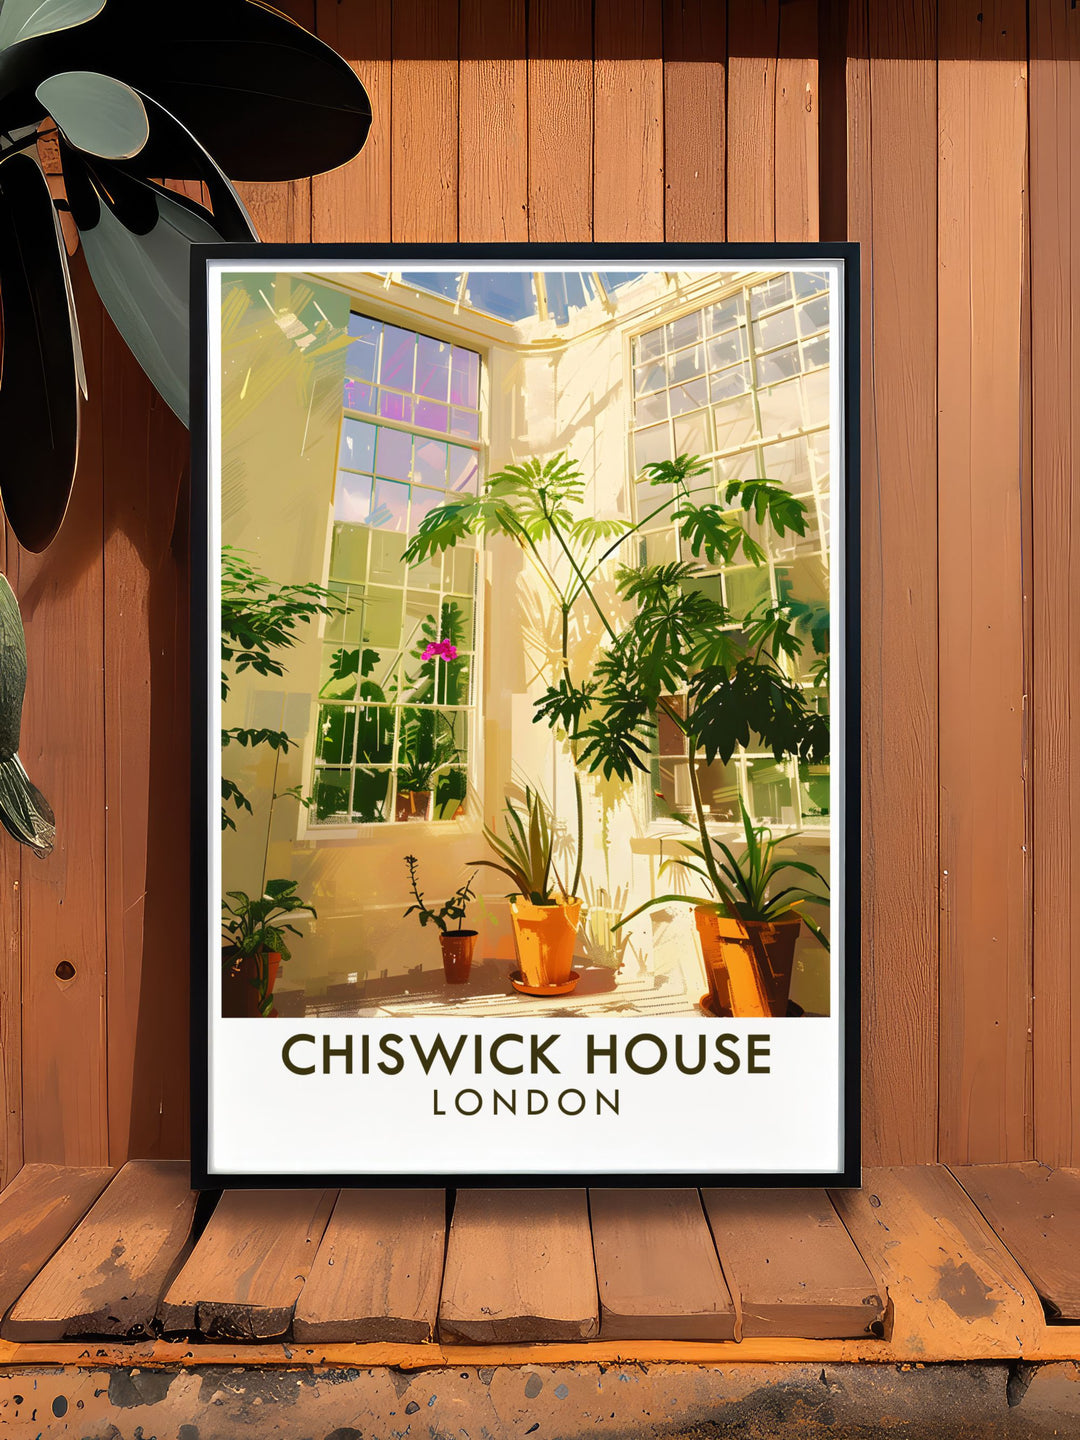 Enjoy the serene atmosphere of the Chiswick House Conservatory, where vibrant camellias bloom amidst tall, arched windows and elegant ironwork.